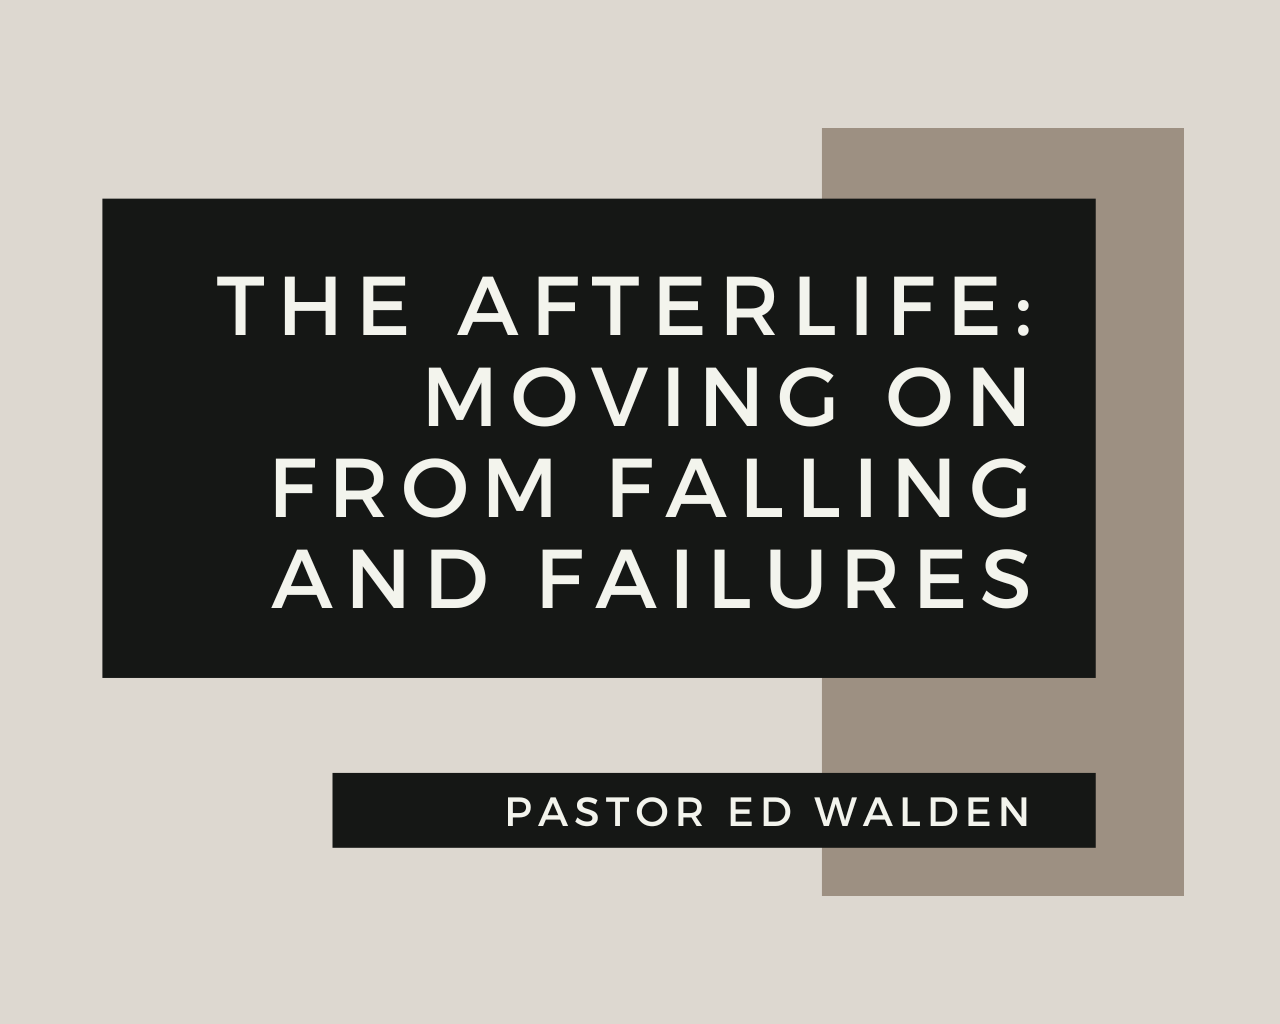 The Afterlife: Moving On From Failures and Falling